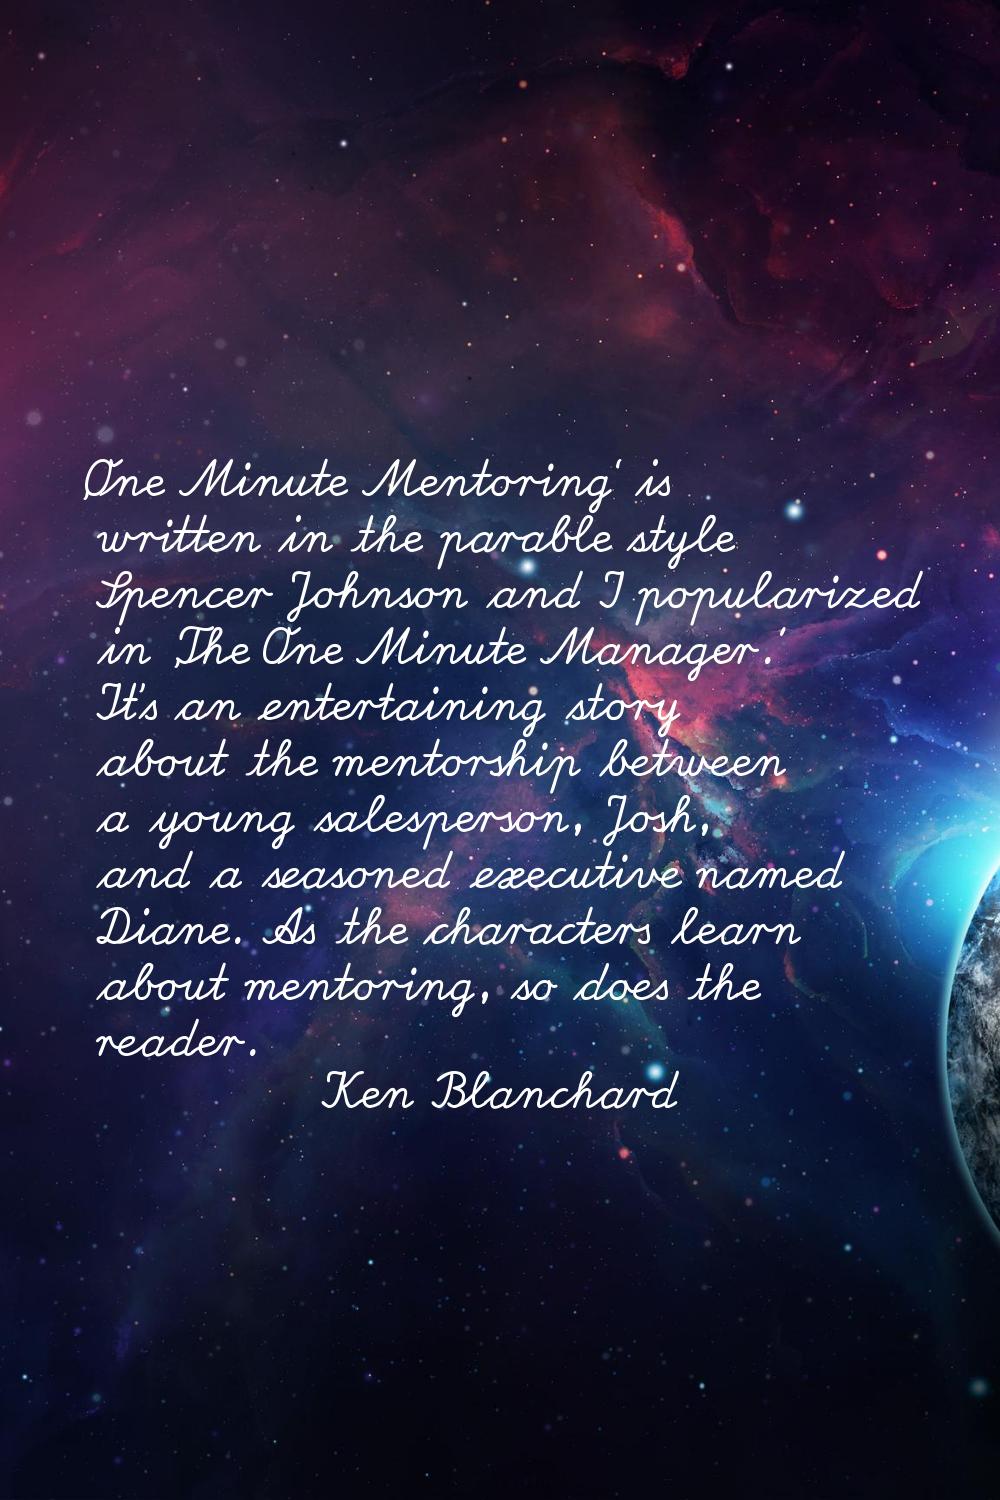 'One Minute Mentoring' is written in the parable style Spencer Johnson and I popularized in 'The On